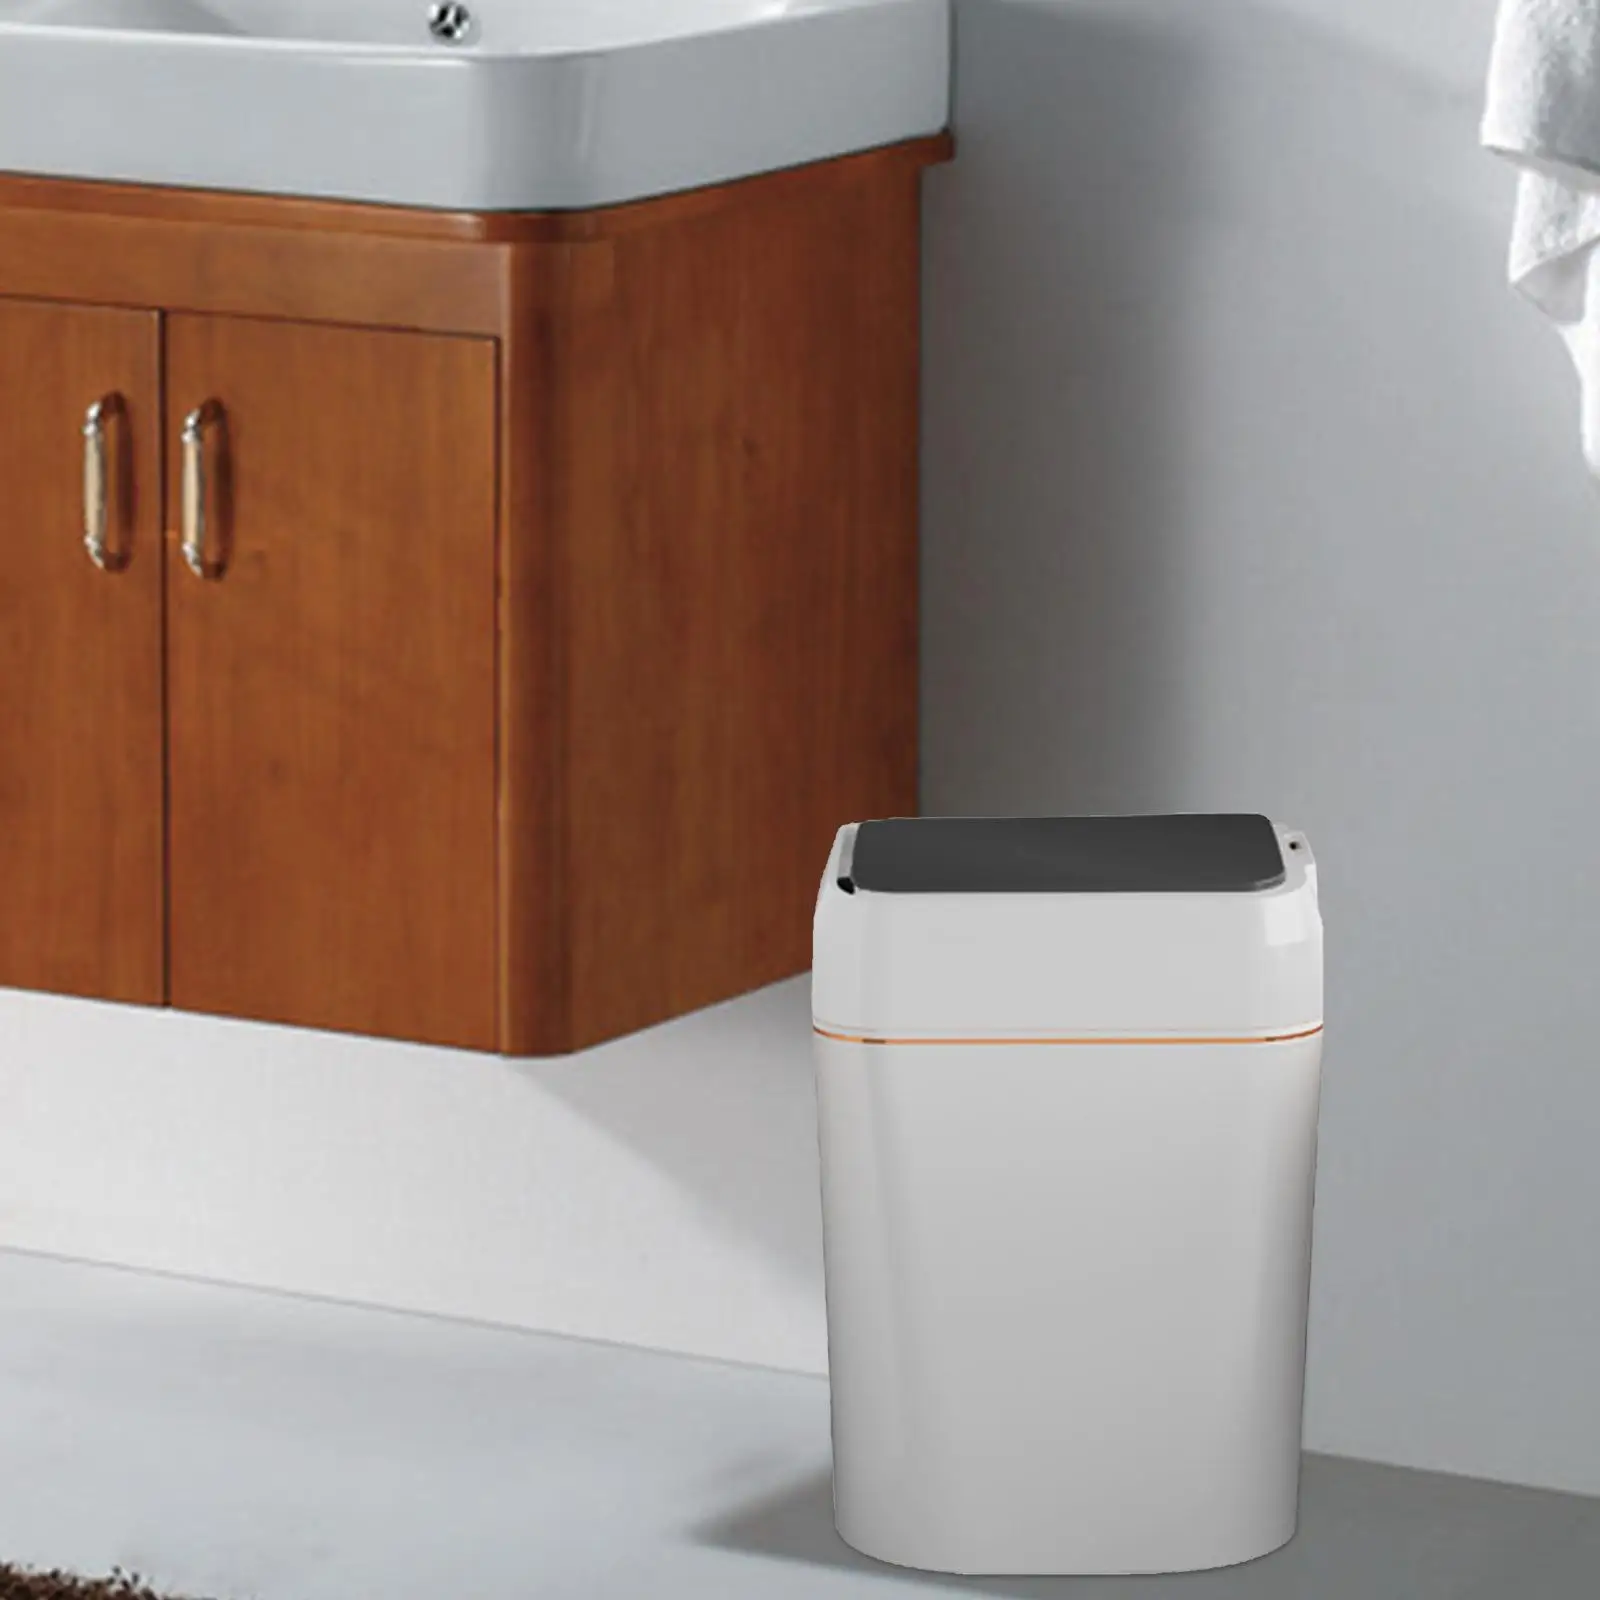 Touchless Trash Can 12L Toilet with Lid Space Saving Rubbish Bin Electric Garbage Bin for Bedroom Corner Bathroom Office